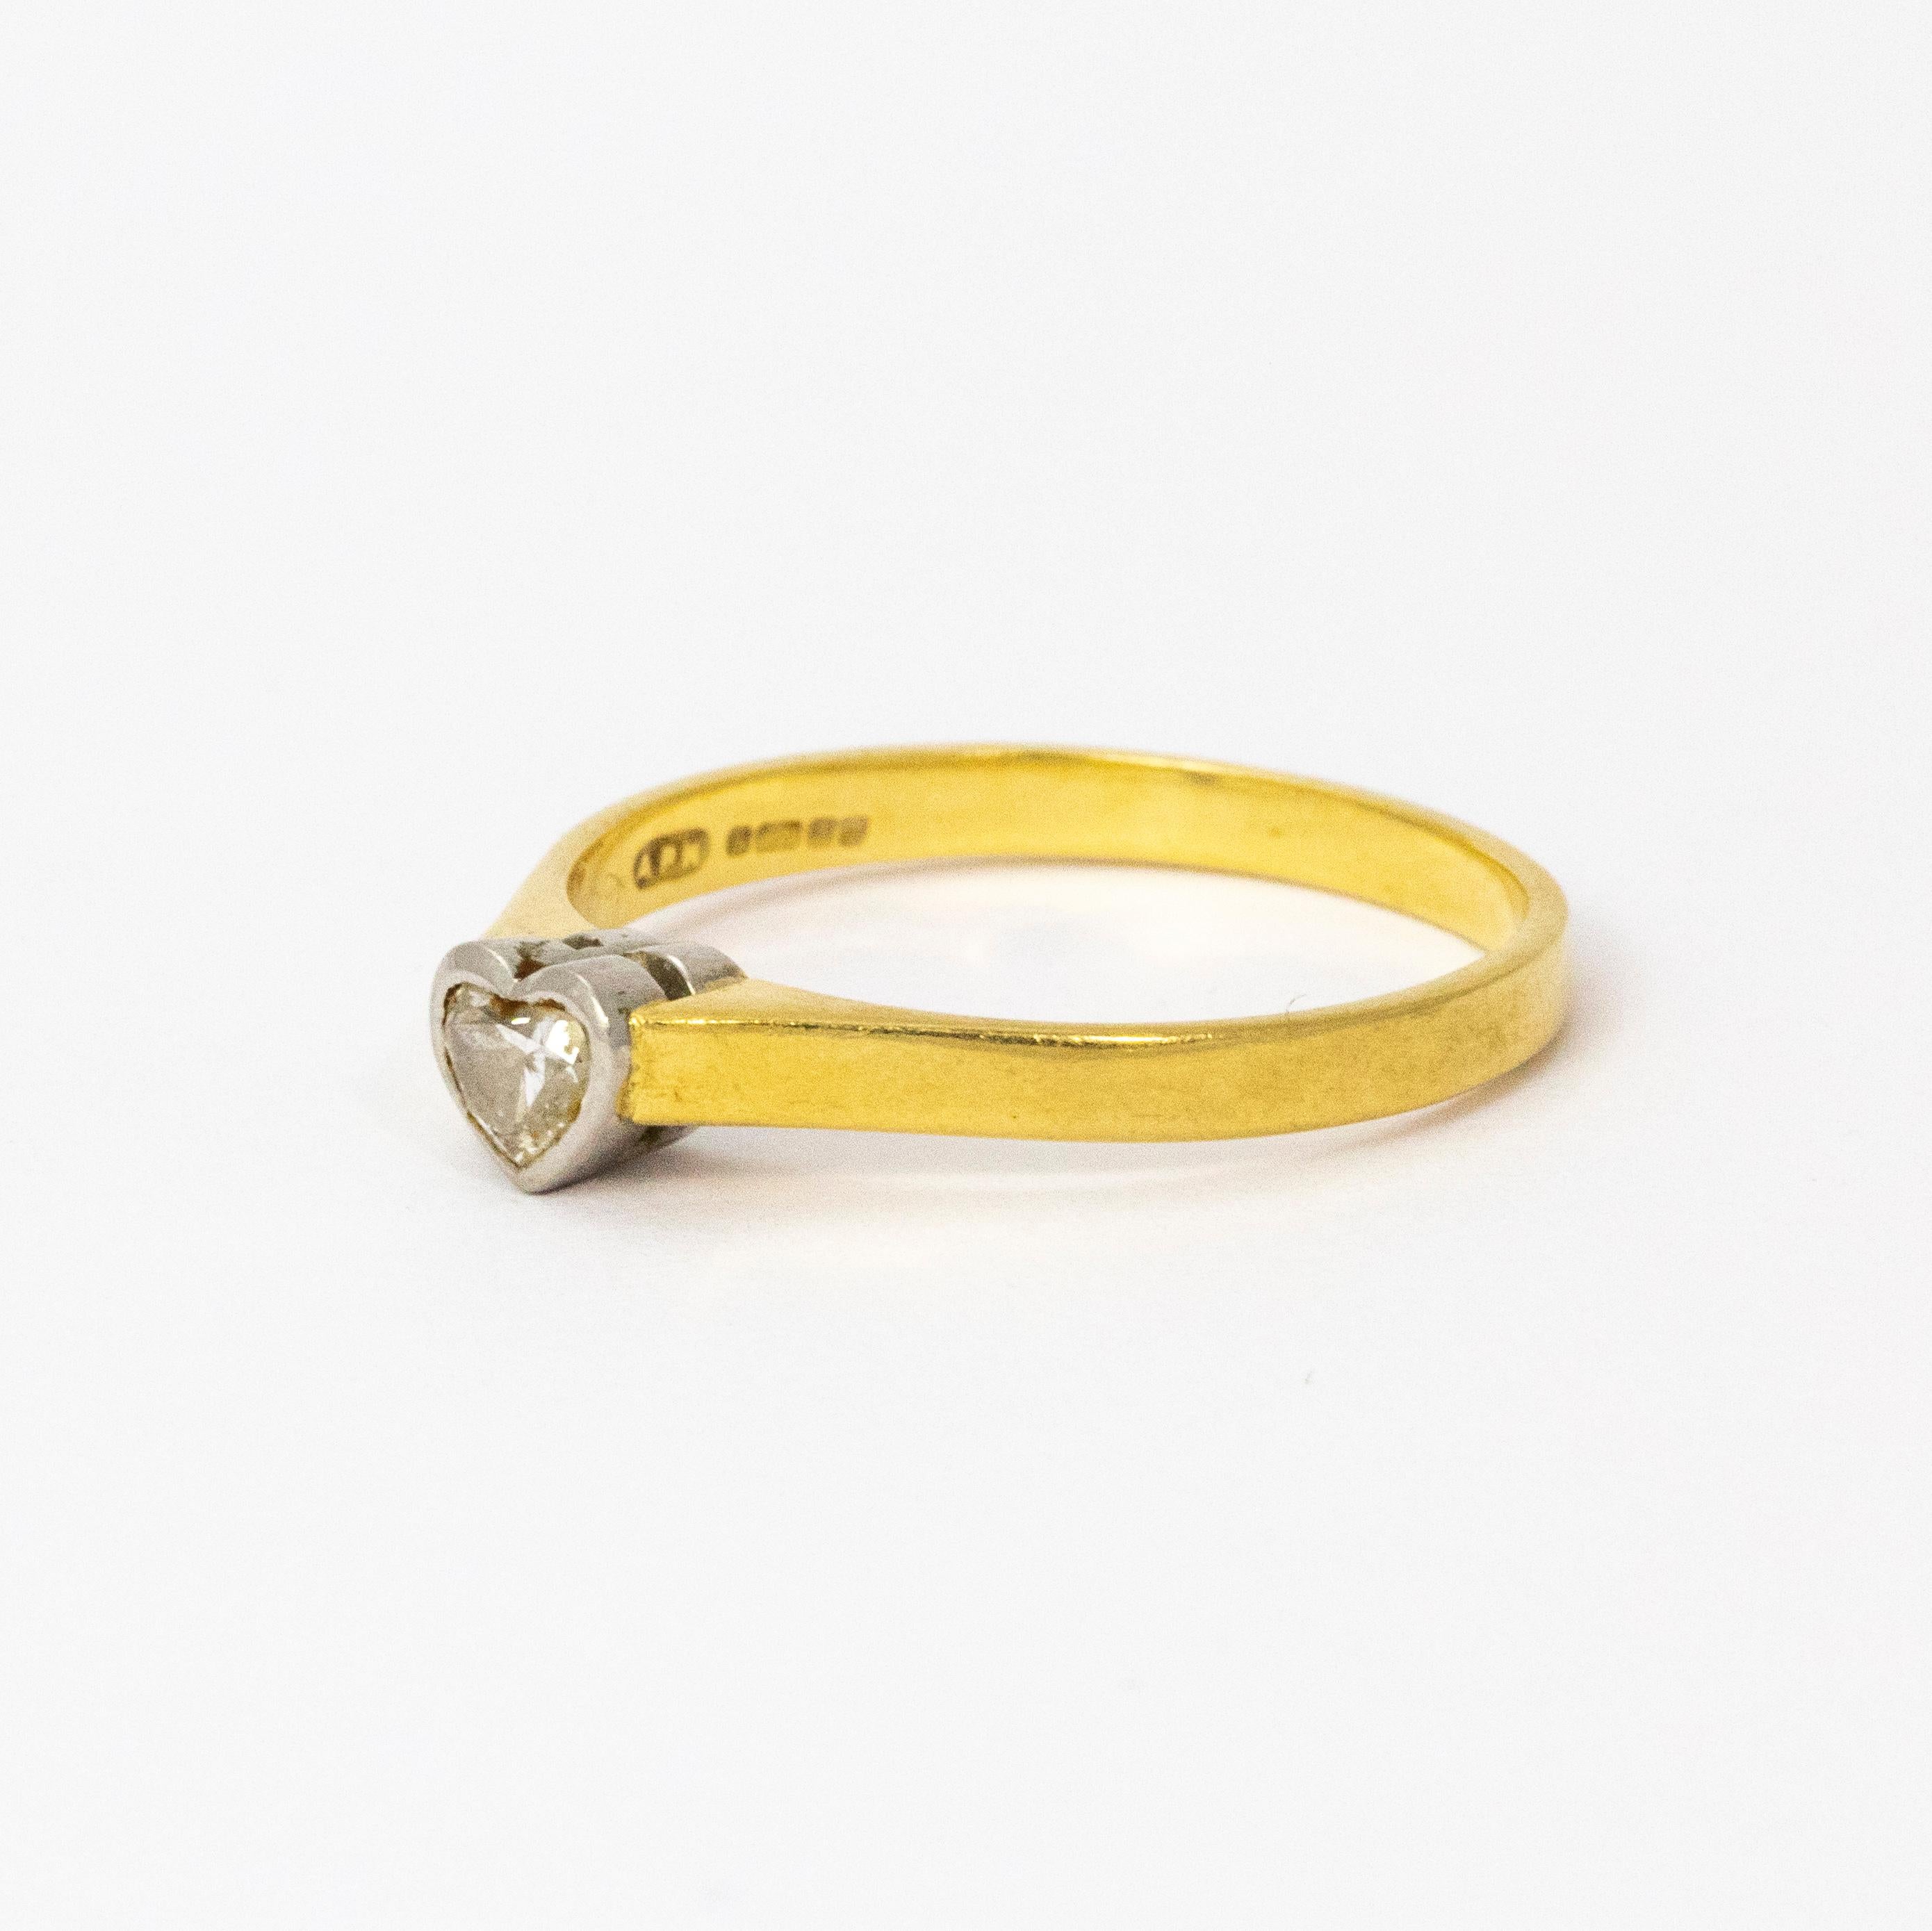 A wonderful vintage ring featuring an incredible central heart-shaped diamond in a complementing platinum heart setting. Band modelled in 18 karat yellow gold.

Ring Size: R 1/2 or 9